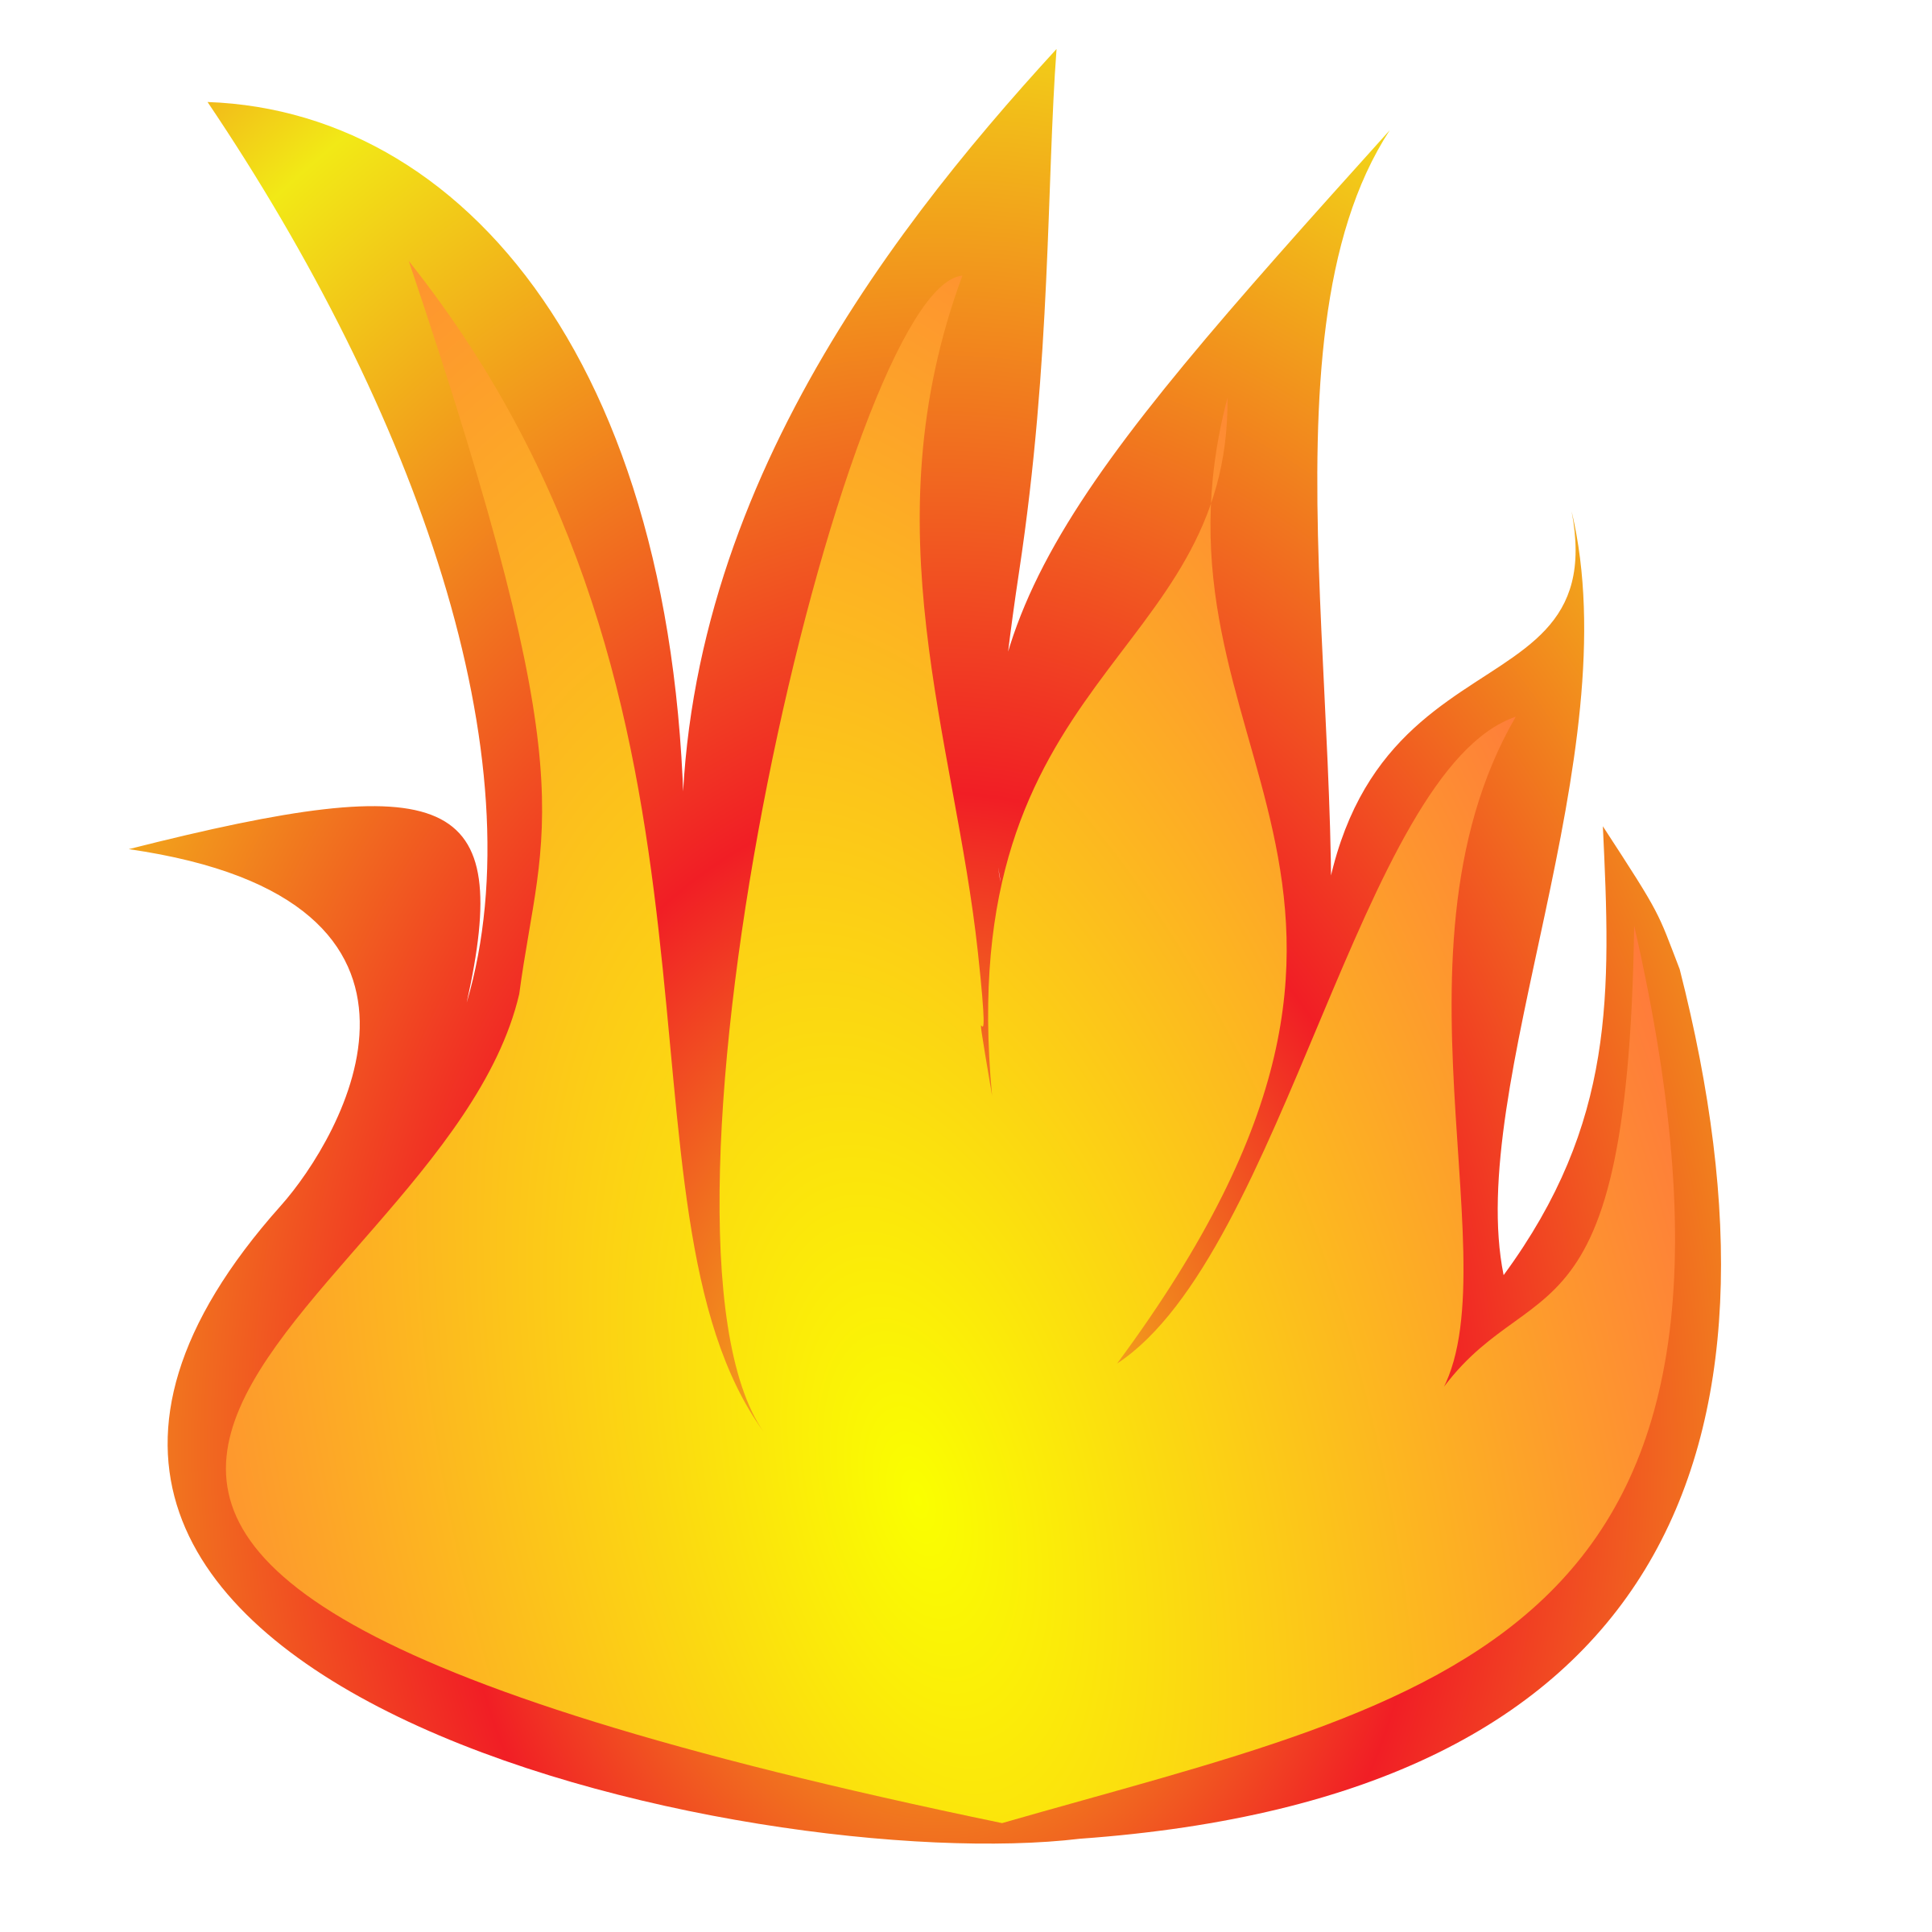 fire torch clipart - photo #41